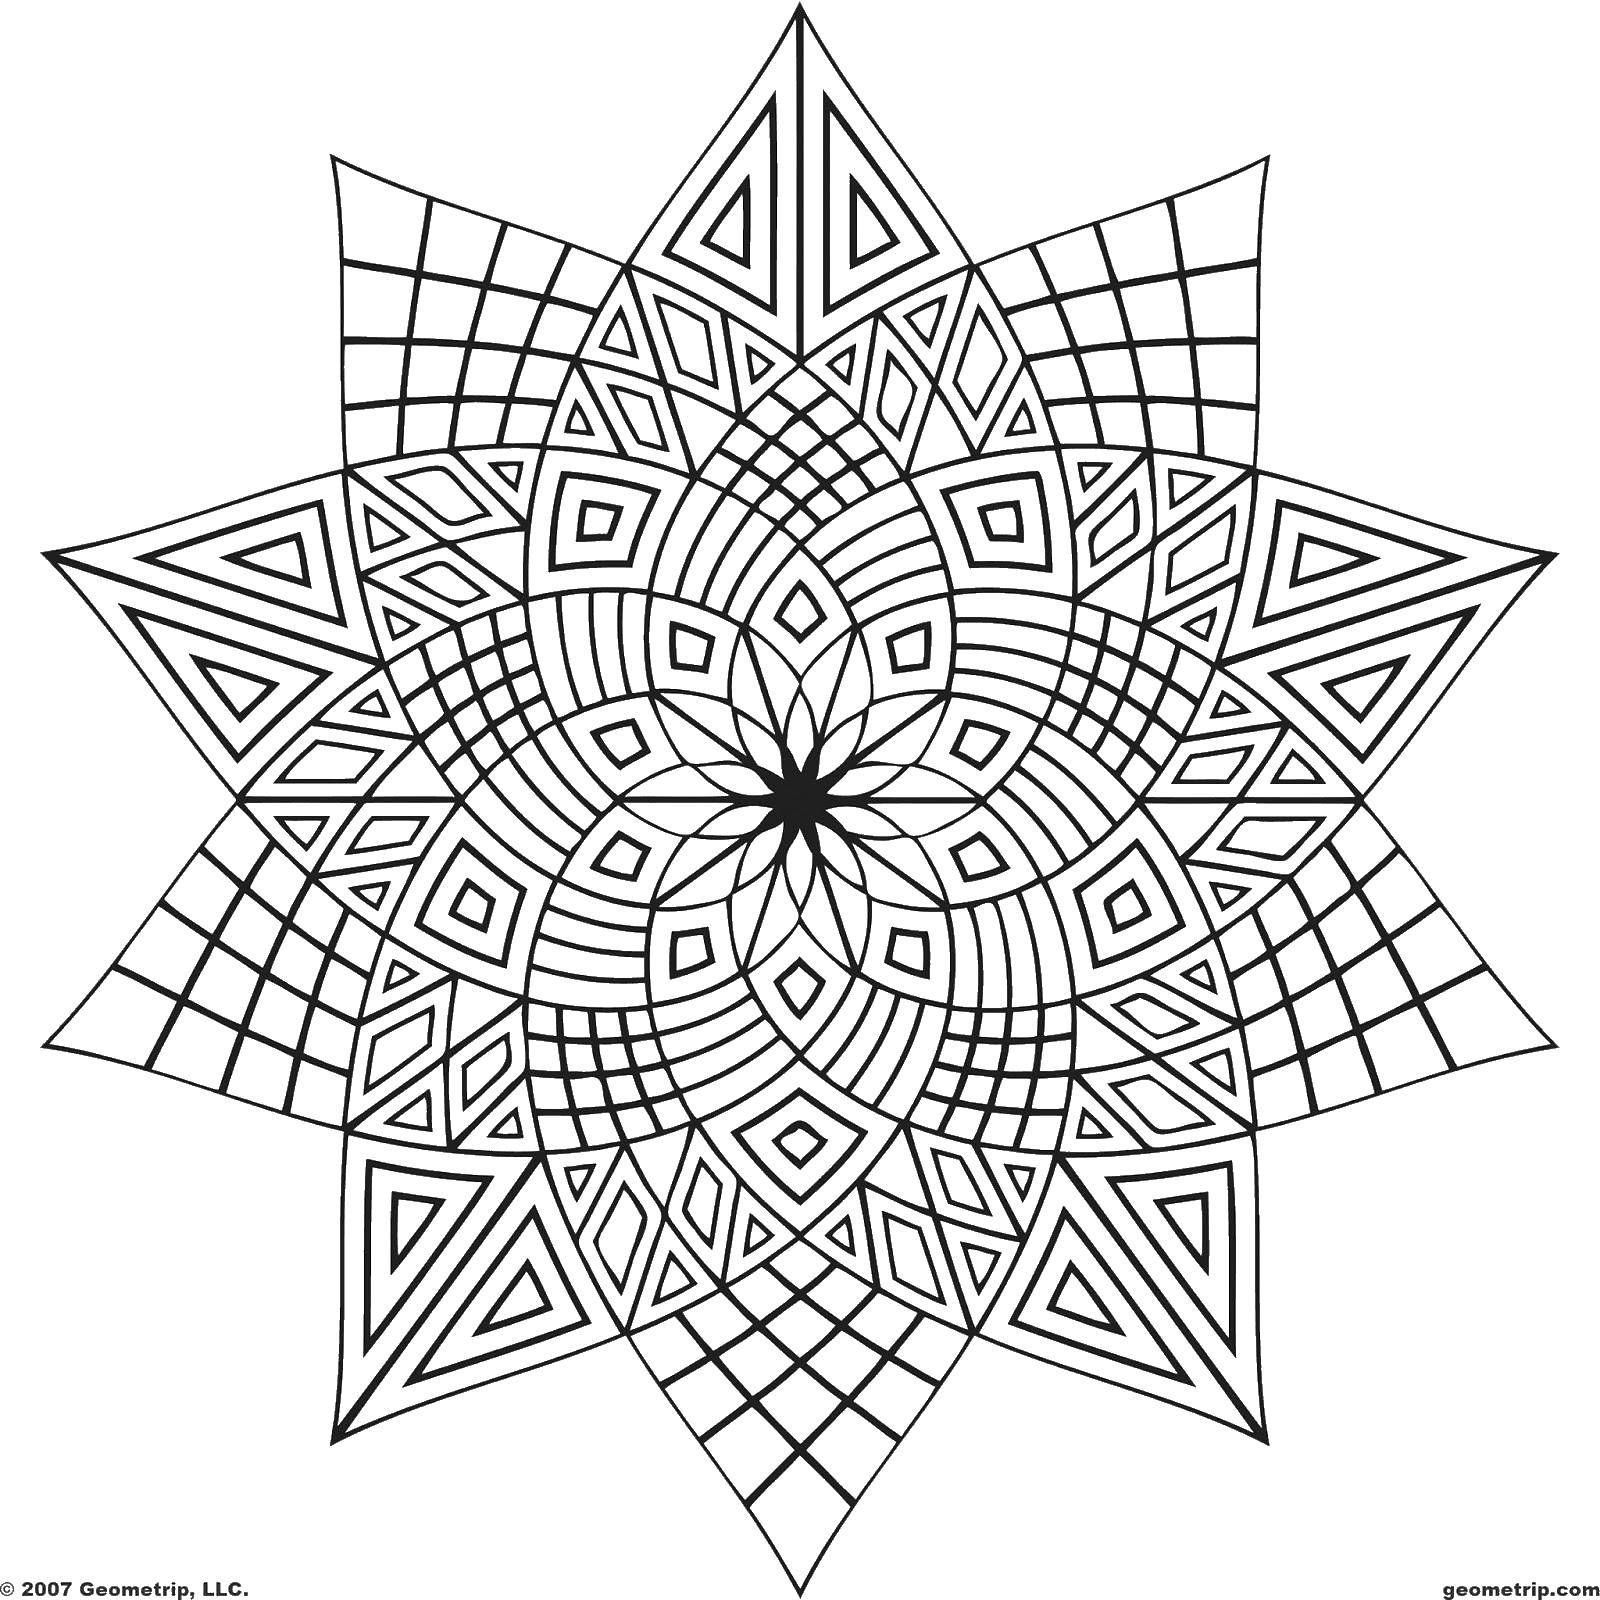 Coloring Flower patterns. Category Patterns with flowers. Tags:  patterns, flowers, flower.